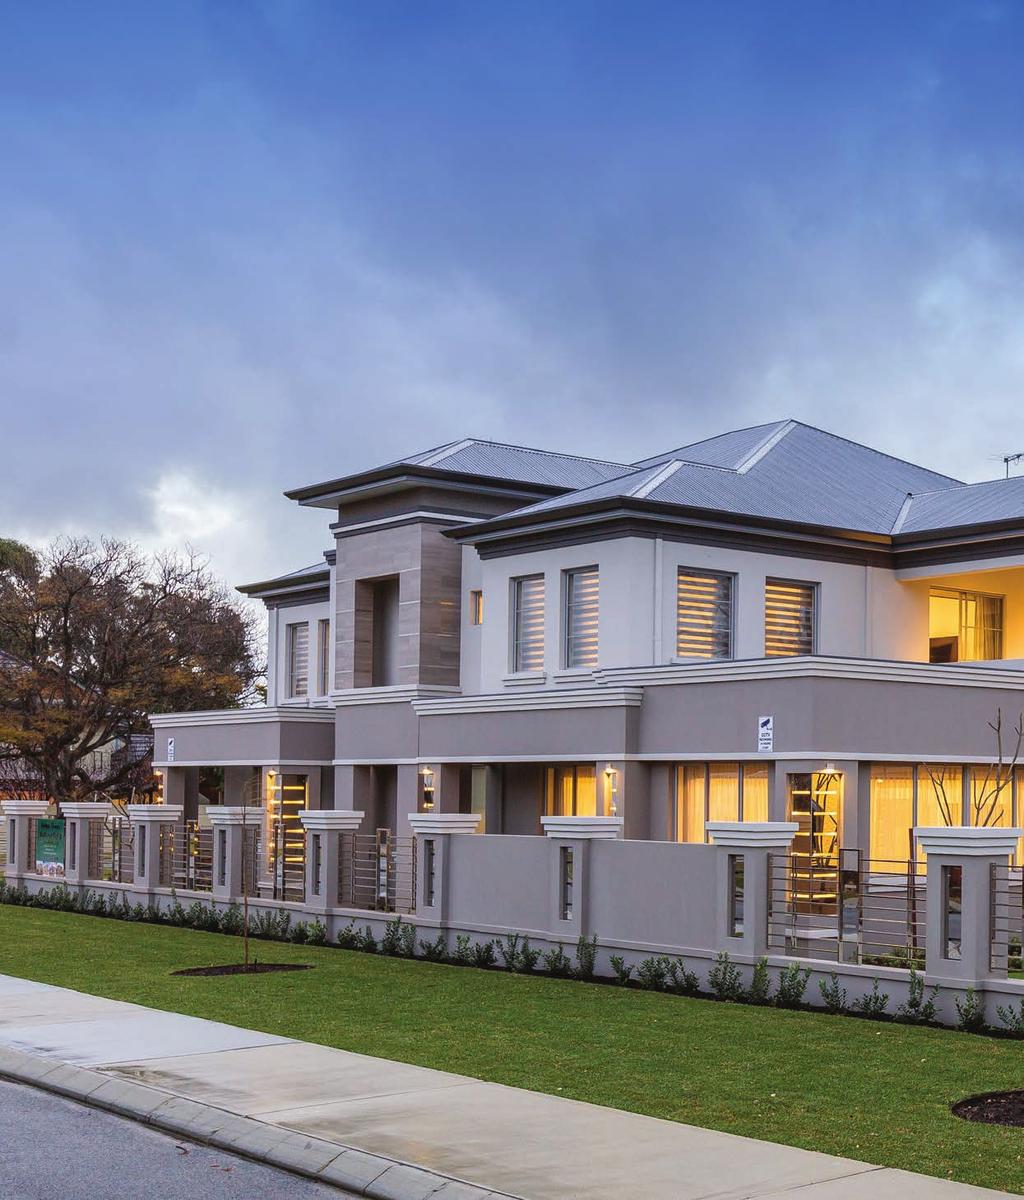 The Resort is the latest luxury home designed and constructed by Atrium Homes, a West Australian building company owned and run by the Marcolina family.